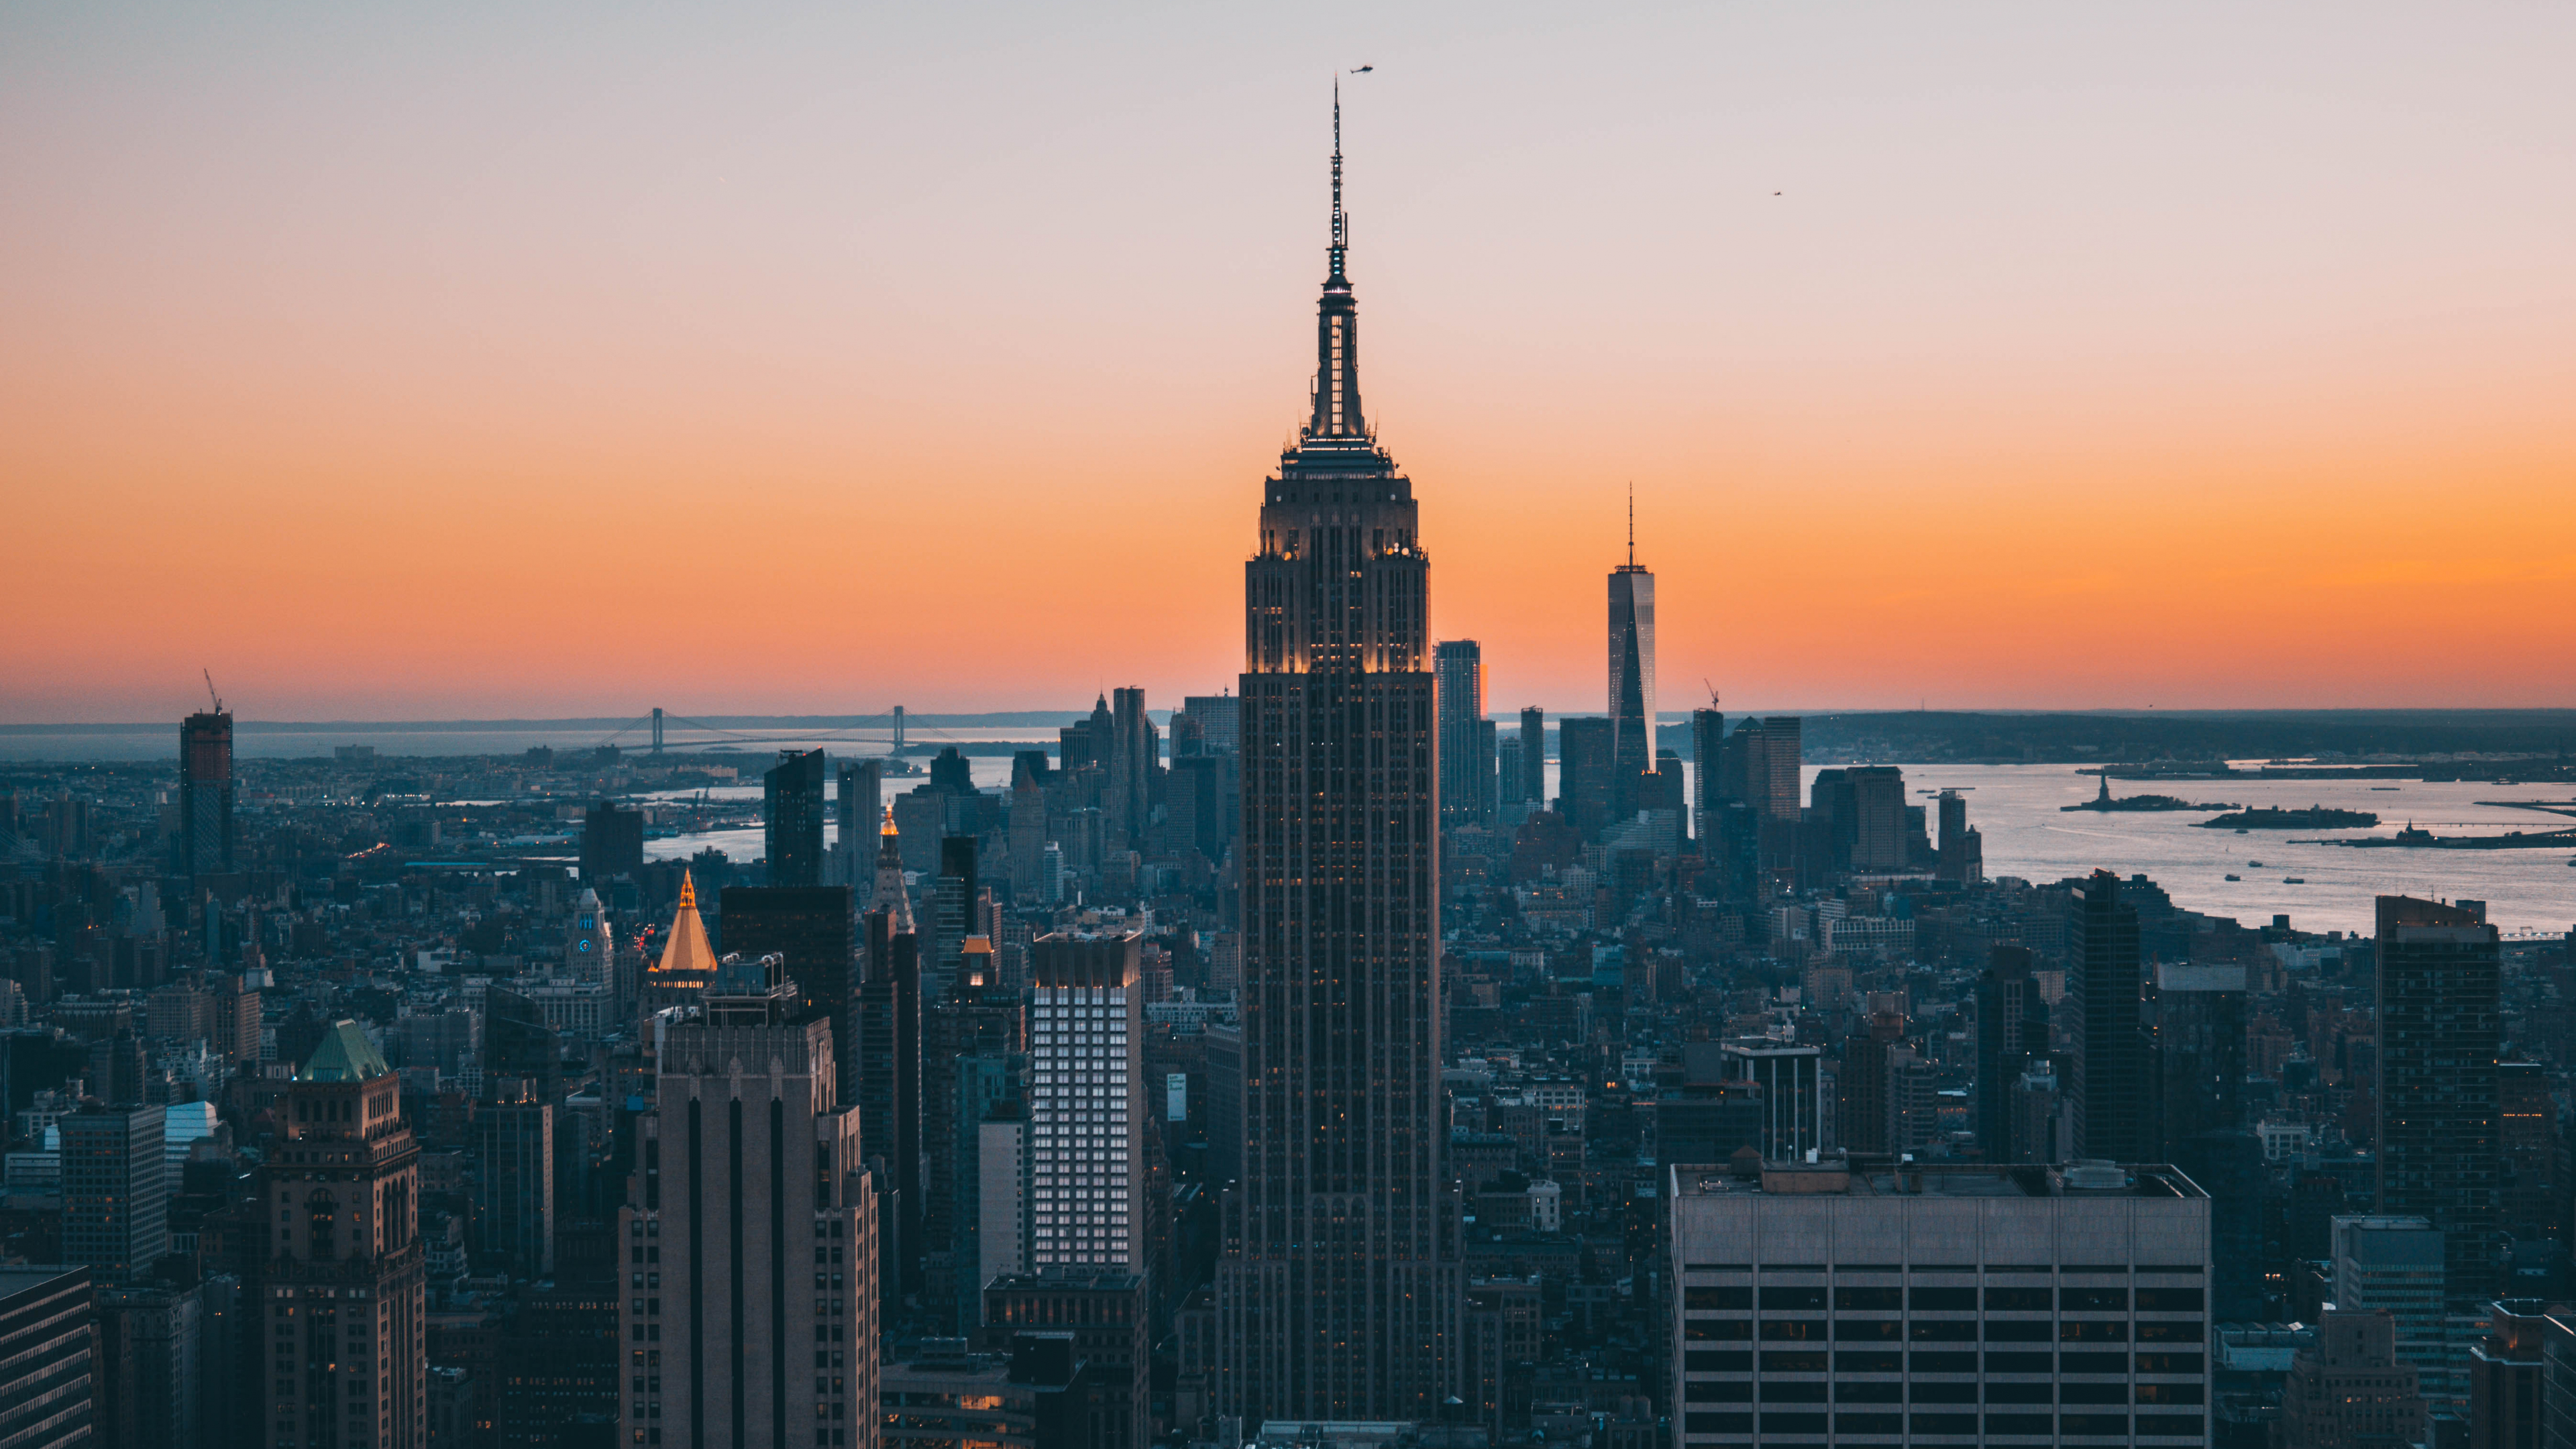 Download 3840x2160 wallpaper empire state building, buildings, sunset